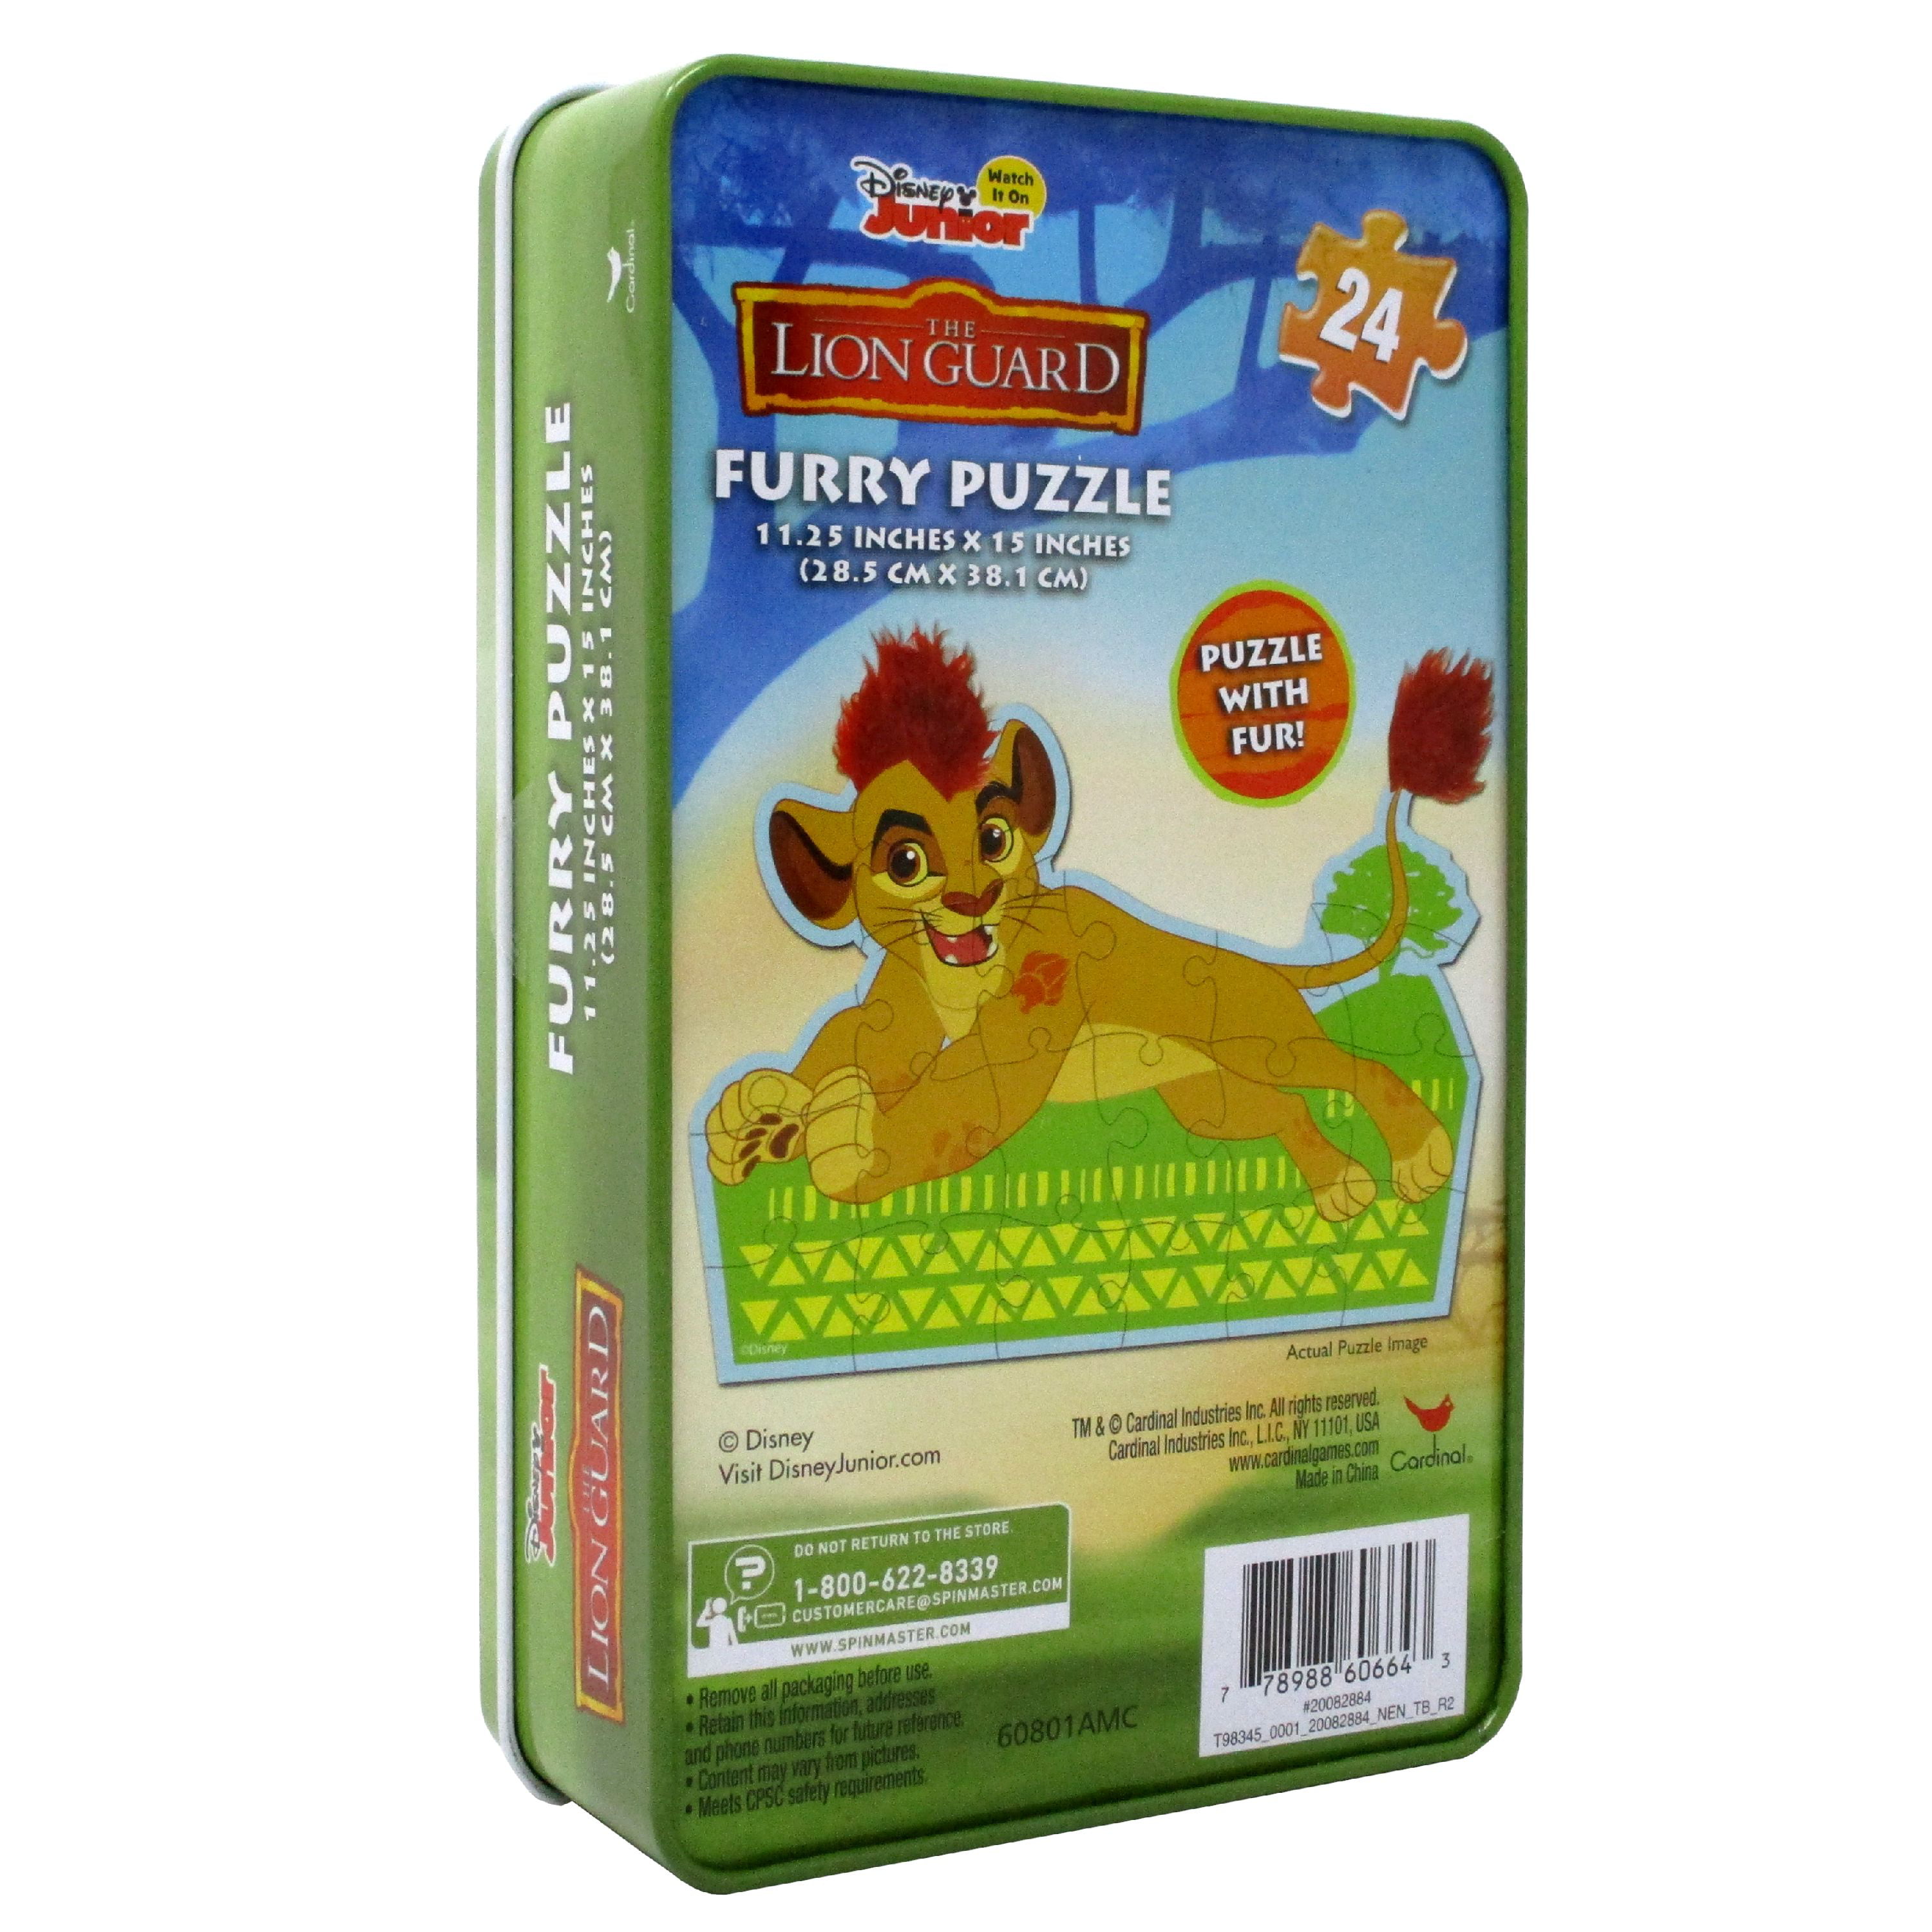 46 Piece Cardinal Lion Guard Floor Puzzle with Hair